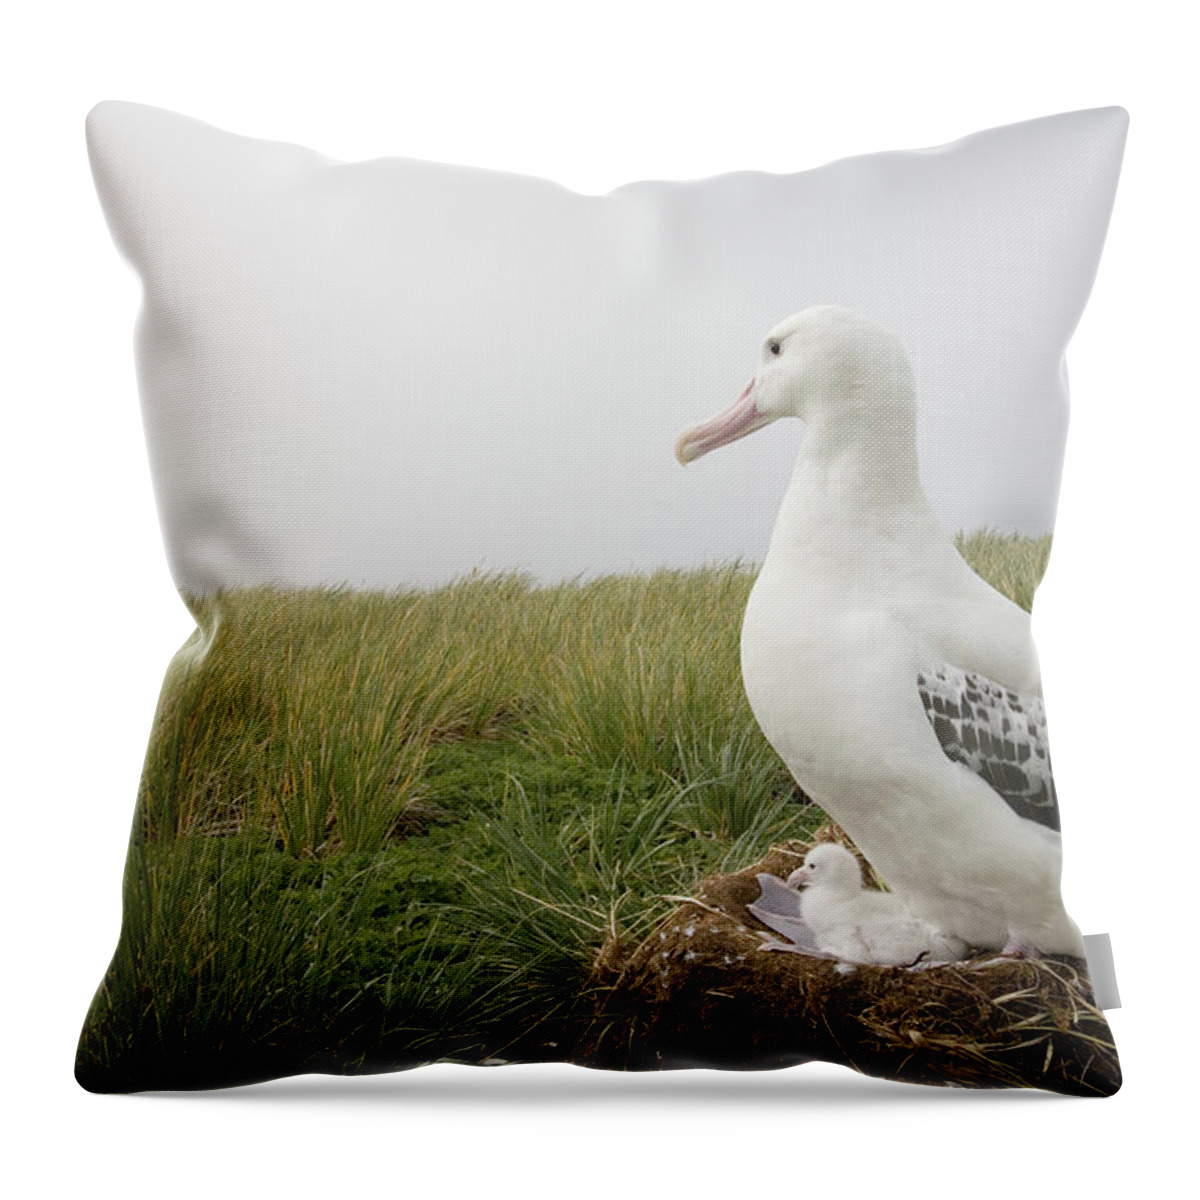 Tussock Throw Pillow featuring the photograph Wandering Albatross Diomedea Exulans On by Paul Souders